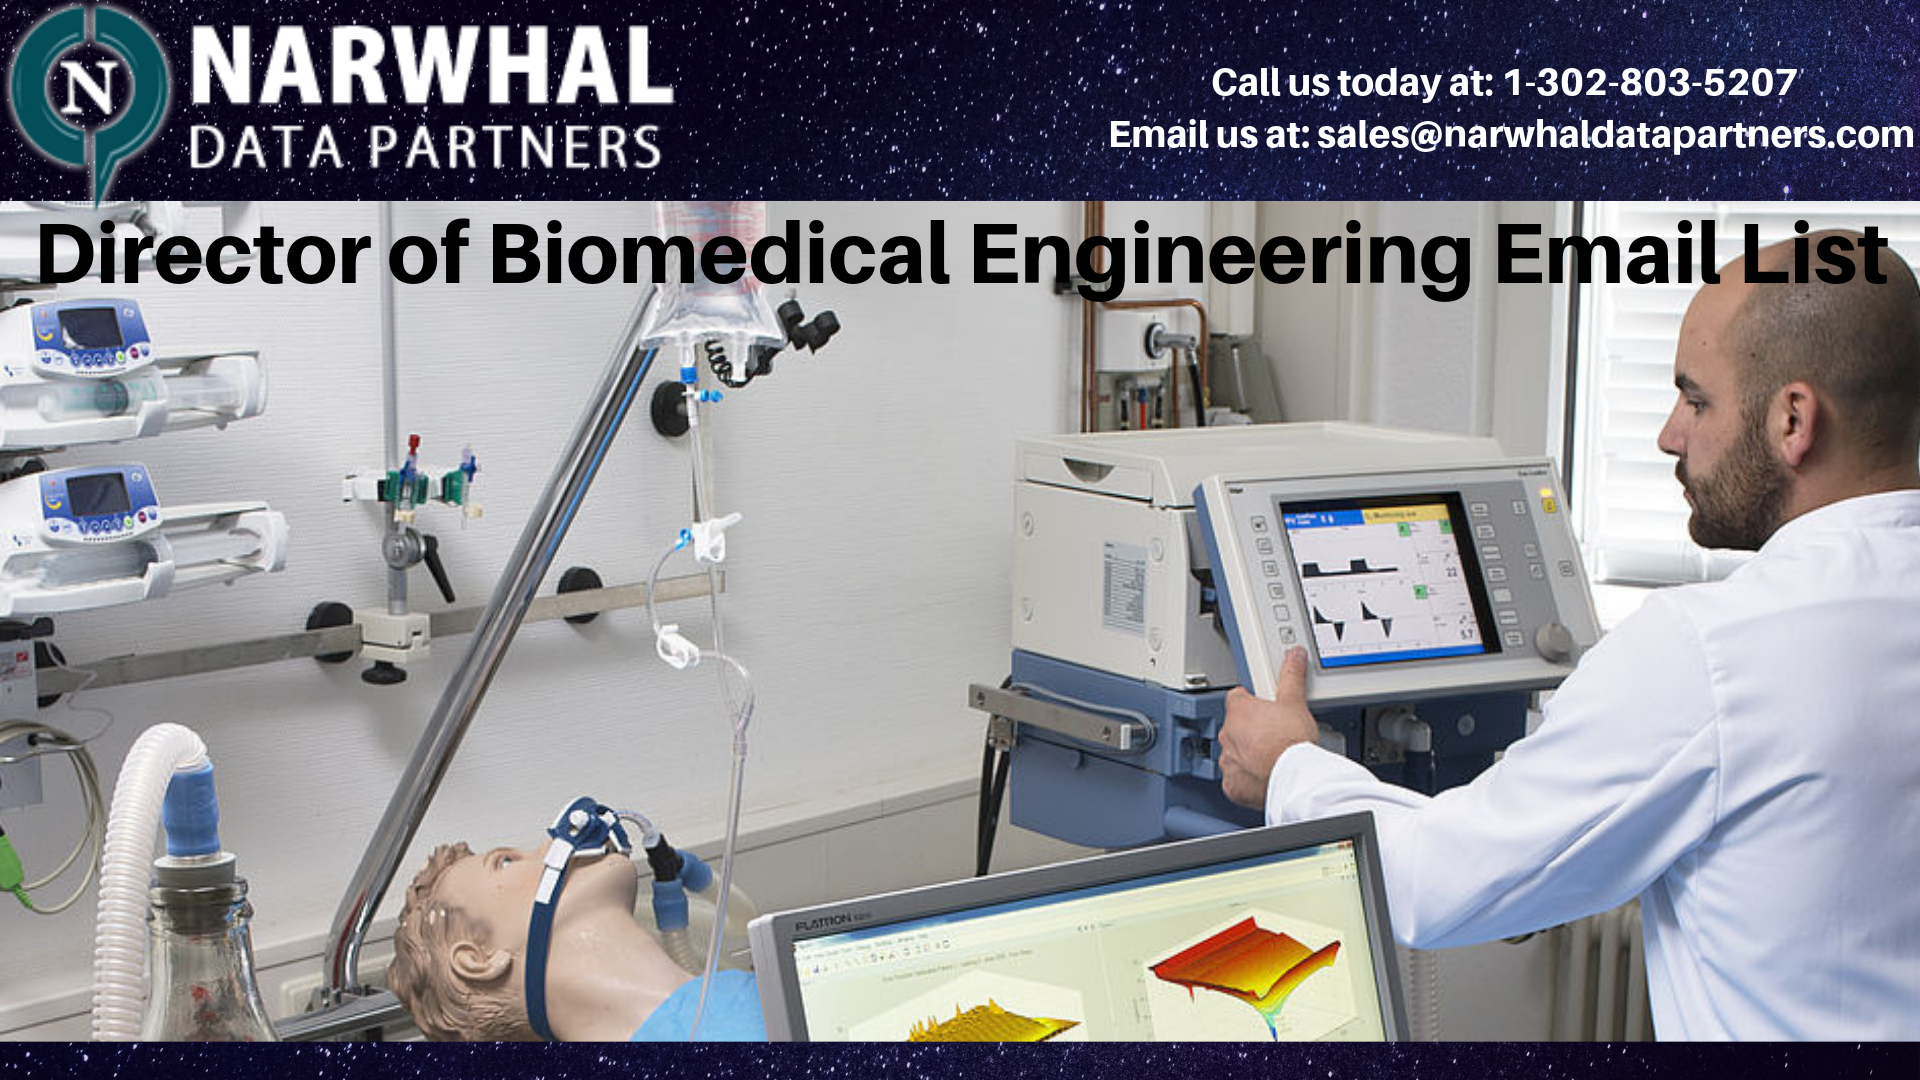 http://narwhaldatapartners.com/director-of-biomedical-engineering-email-list.html